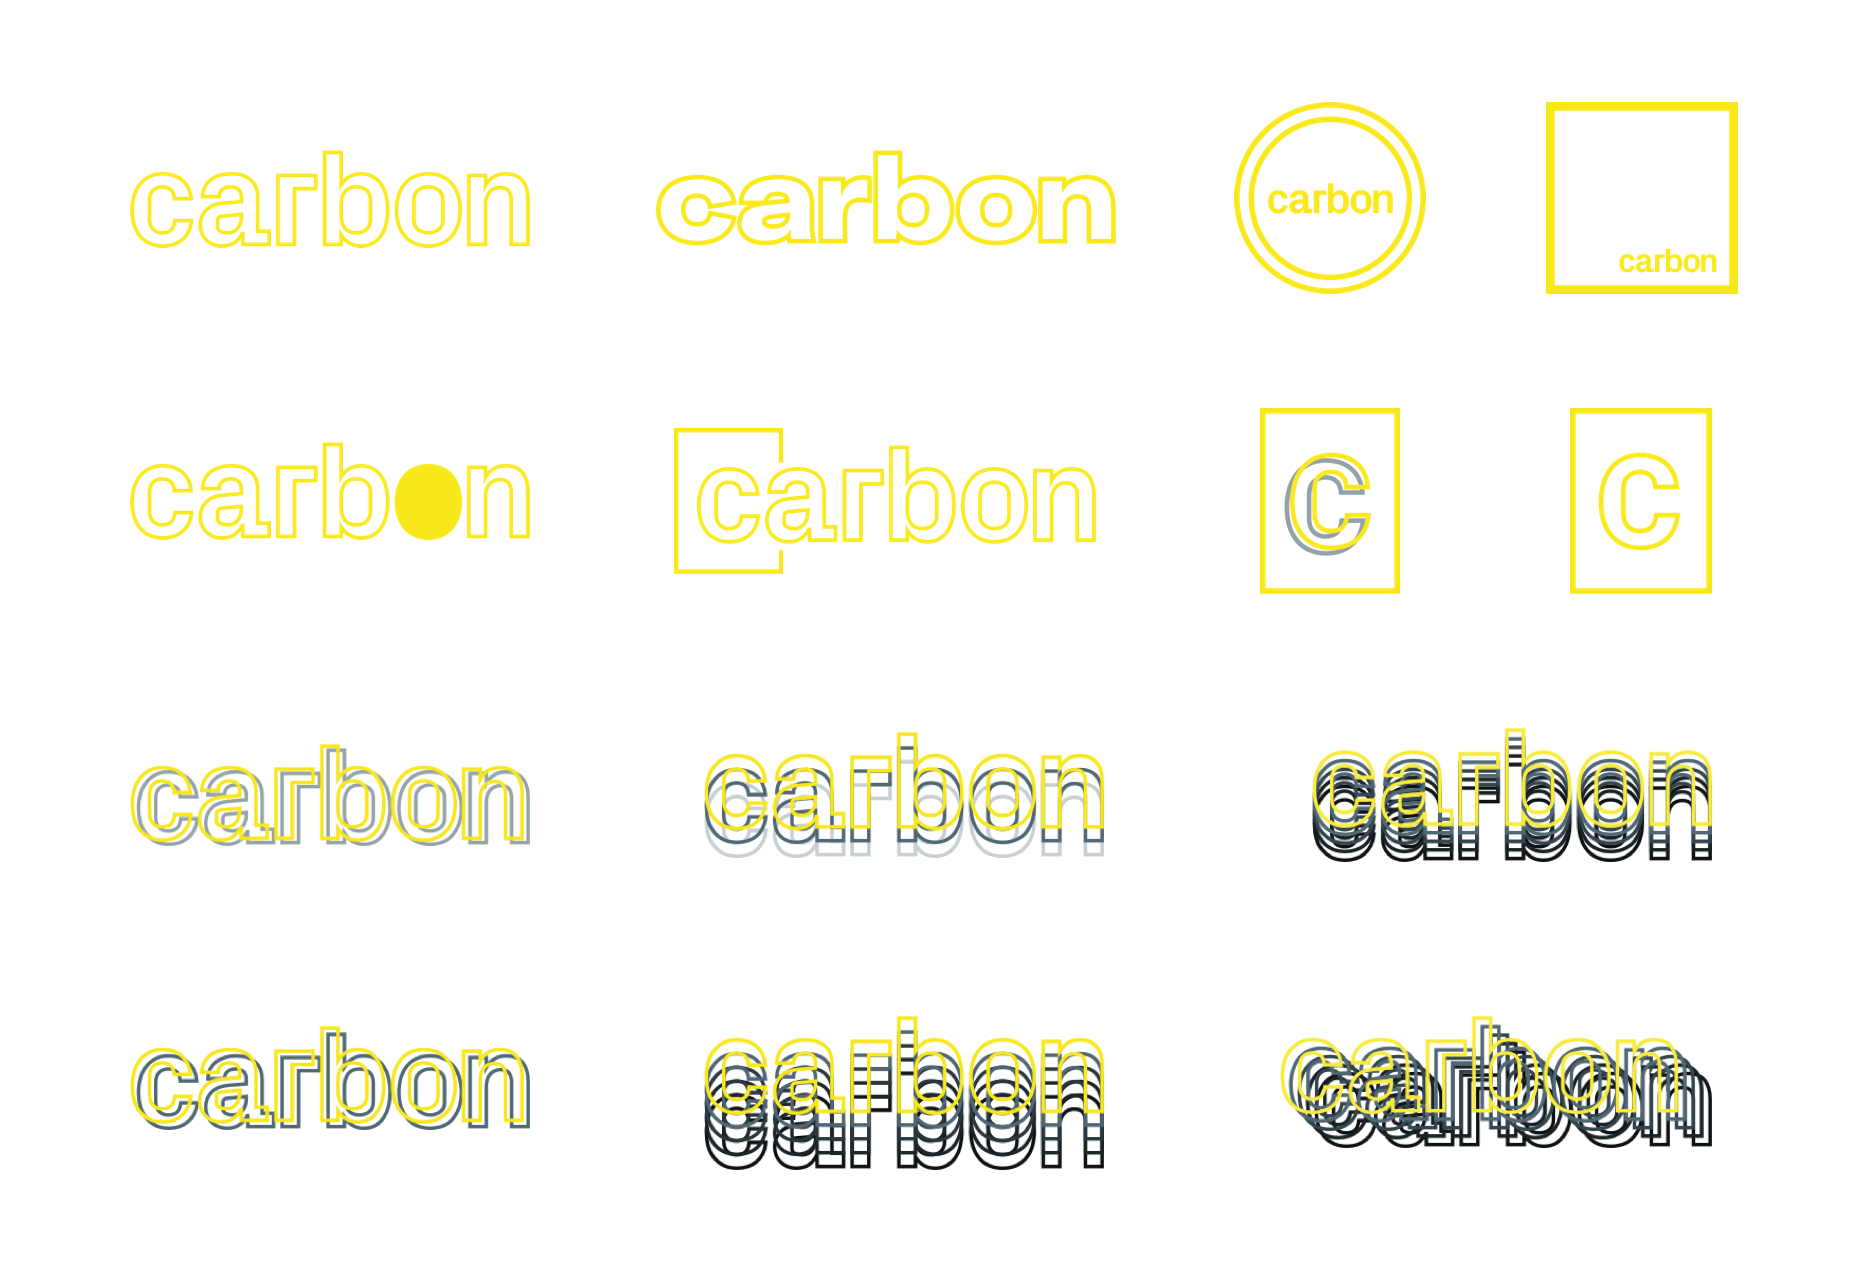 Branding iterations for Carbon